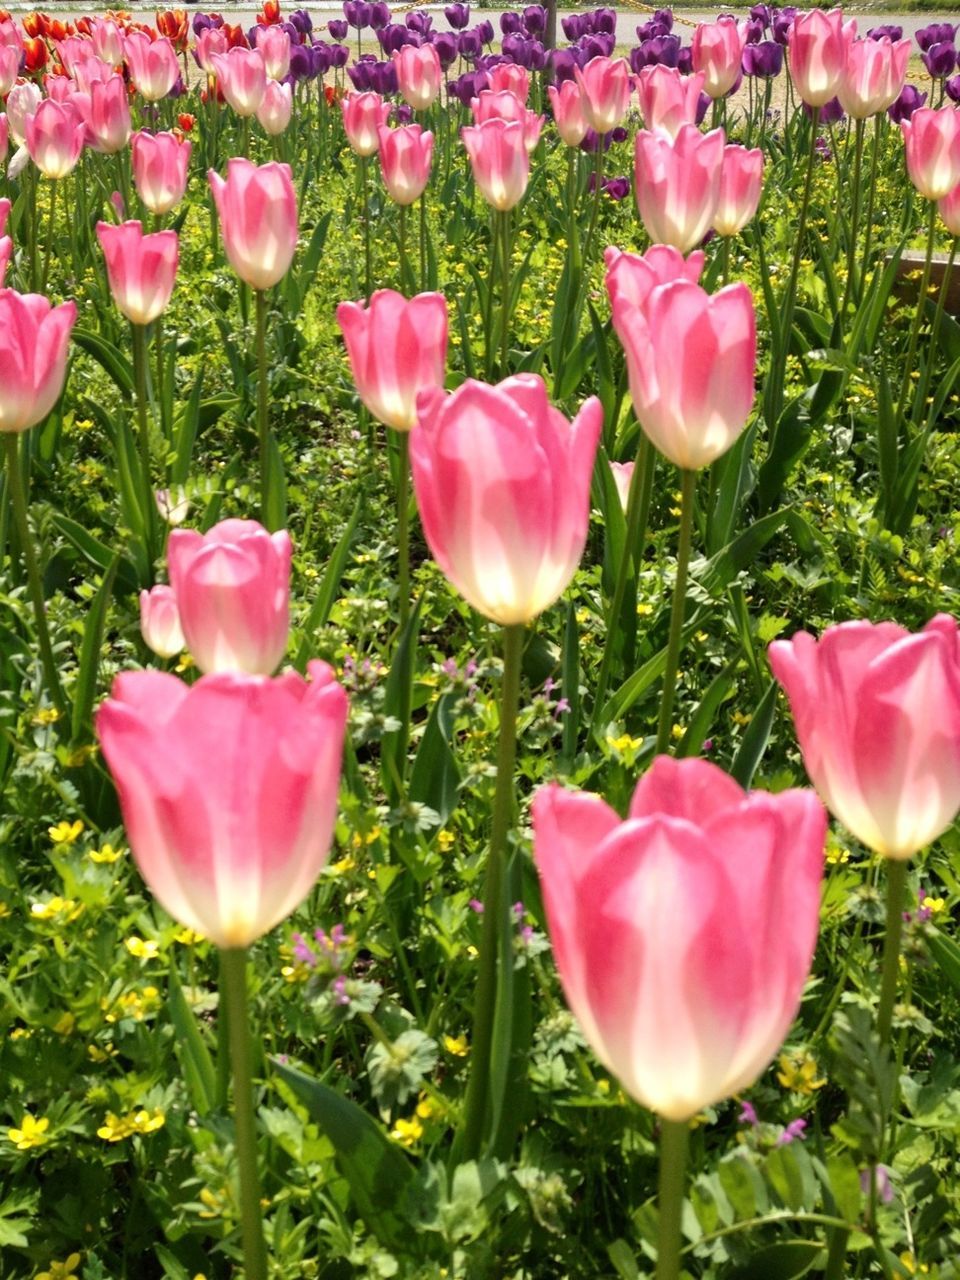 flower, freshness, petal, pink color, tulip, fragility, growth, beauty in nature, flower head, nature, field, blooming, pink, plant, stem, close-up, leaf, blossom, outdoors, day